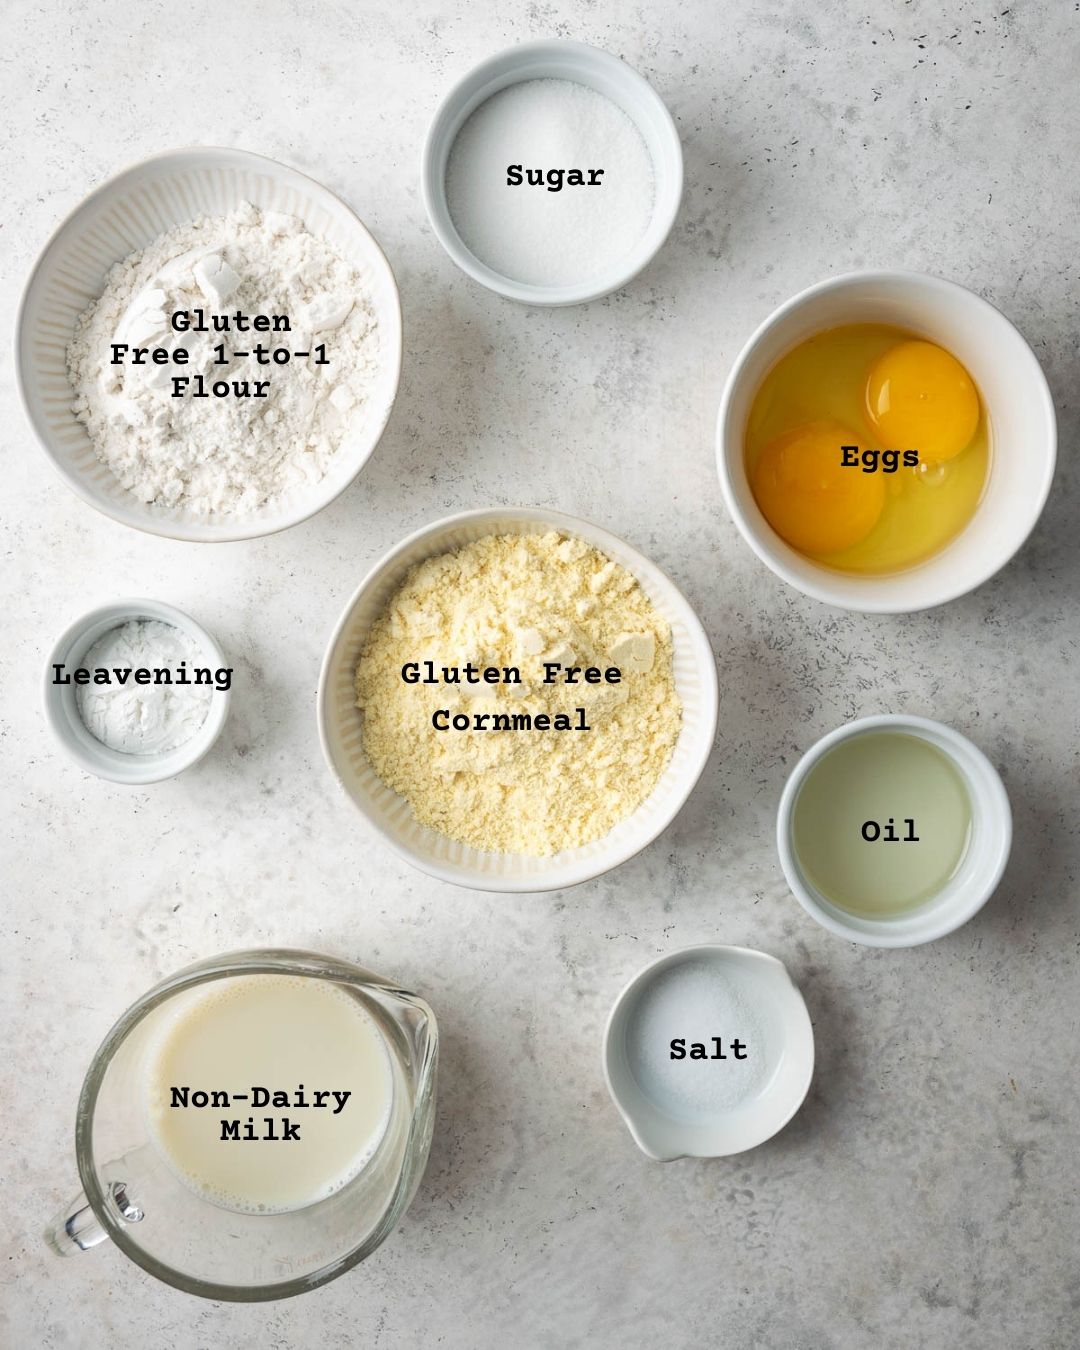 Ingredients for gluten free cornbread muffins on white table.